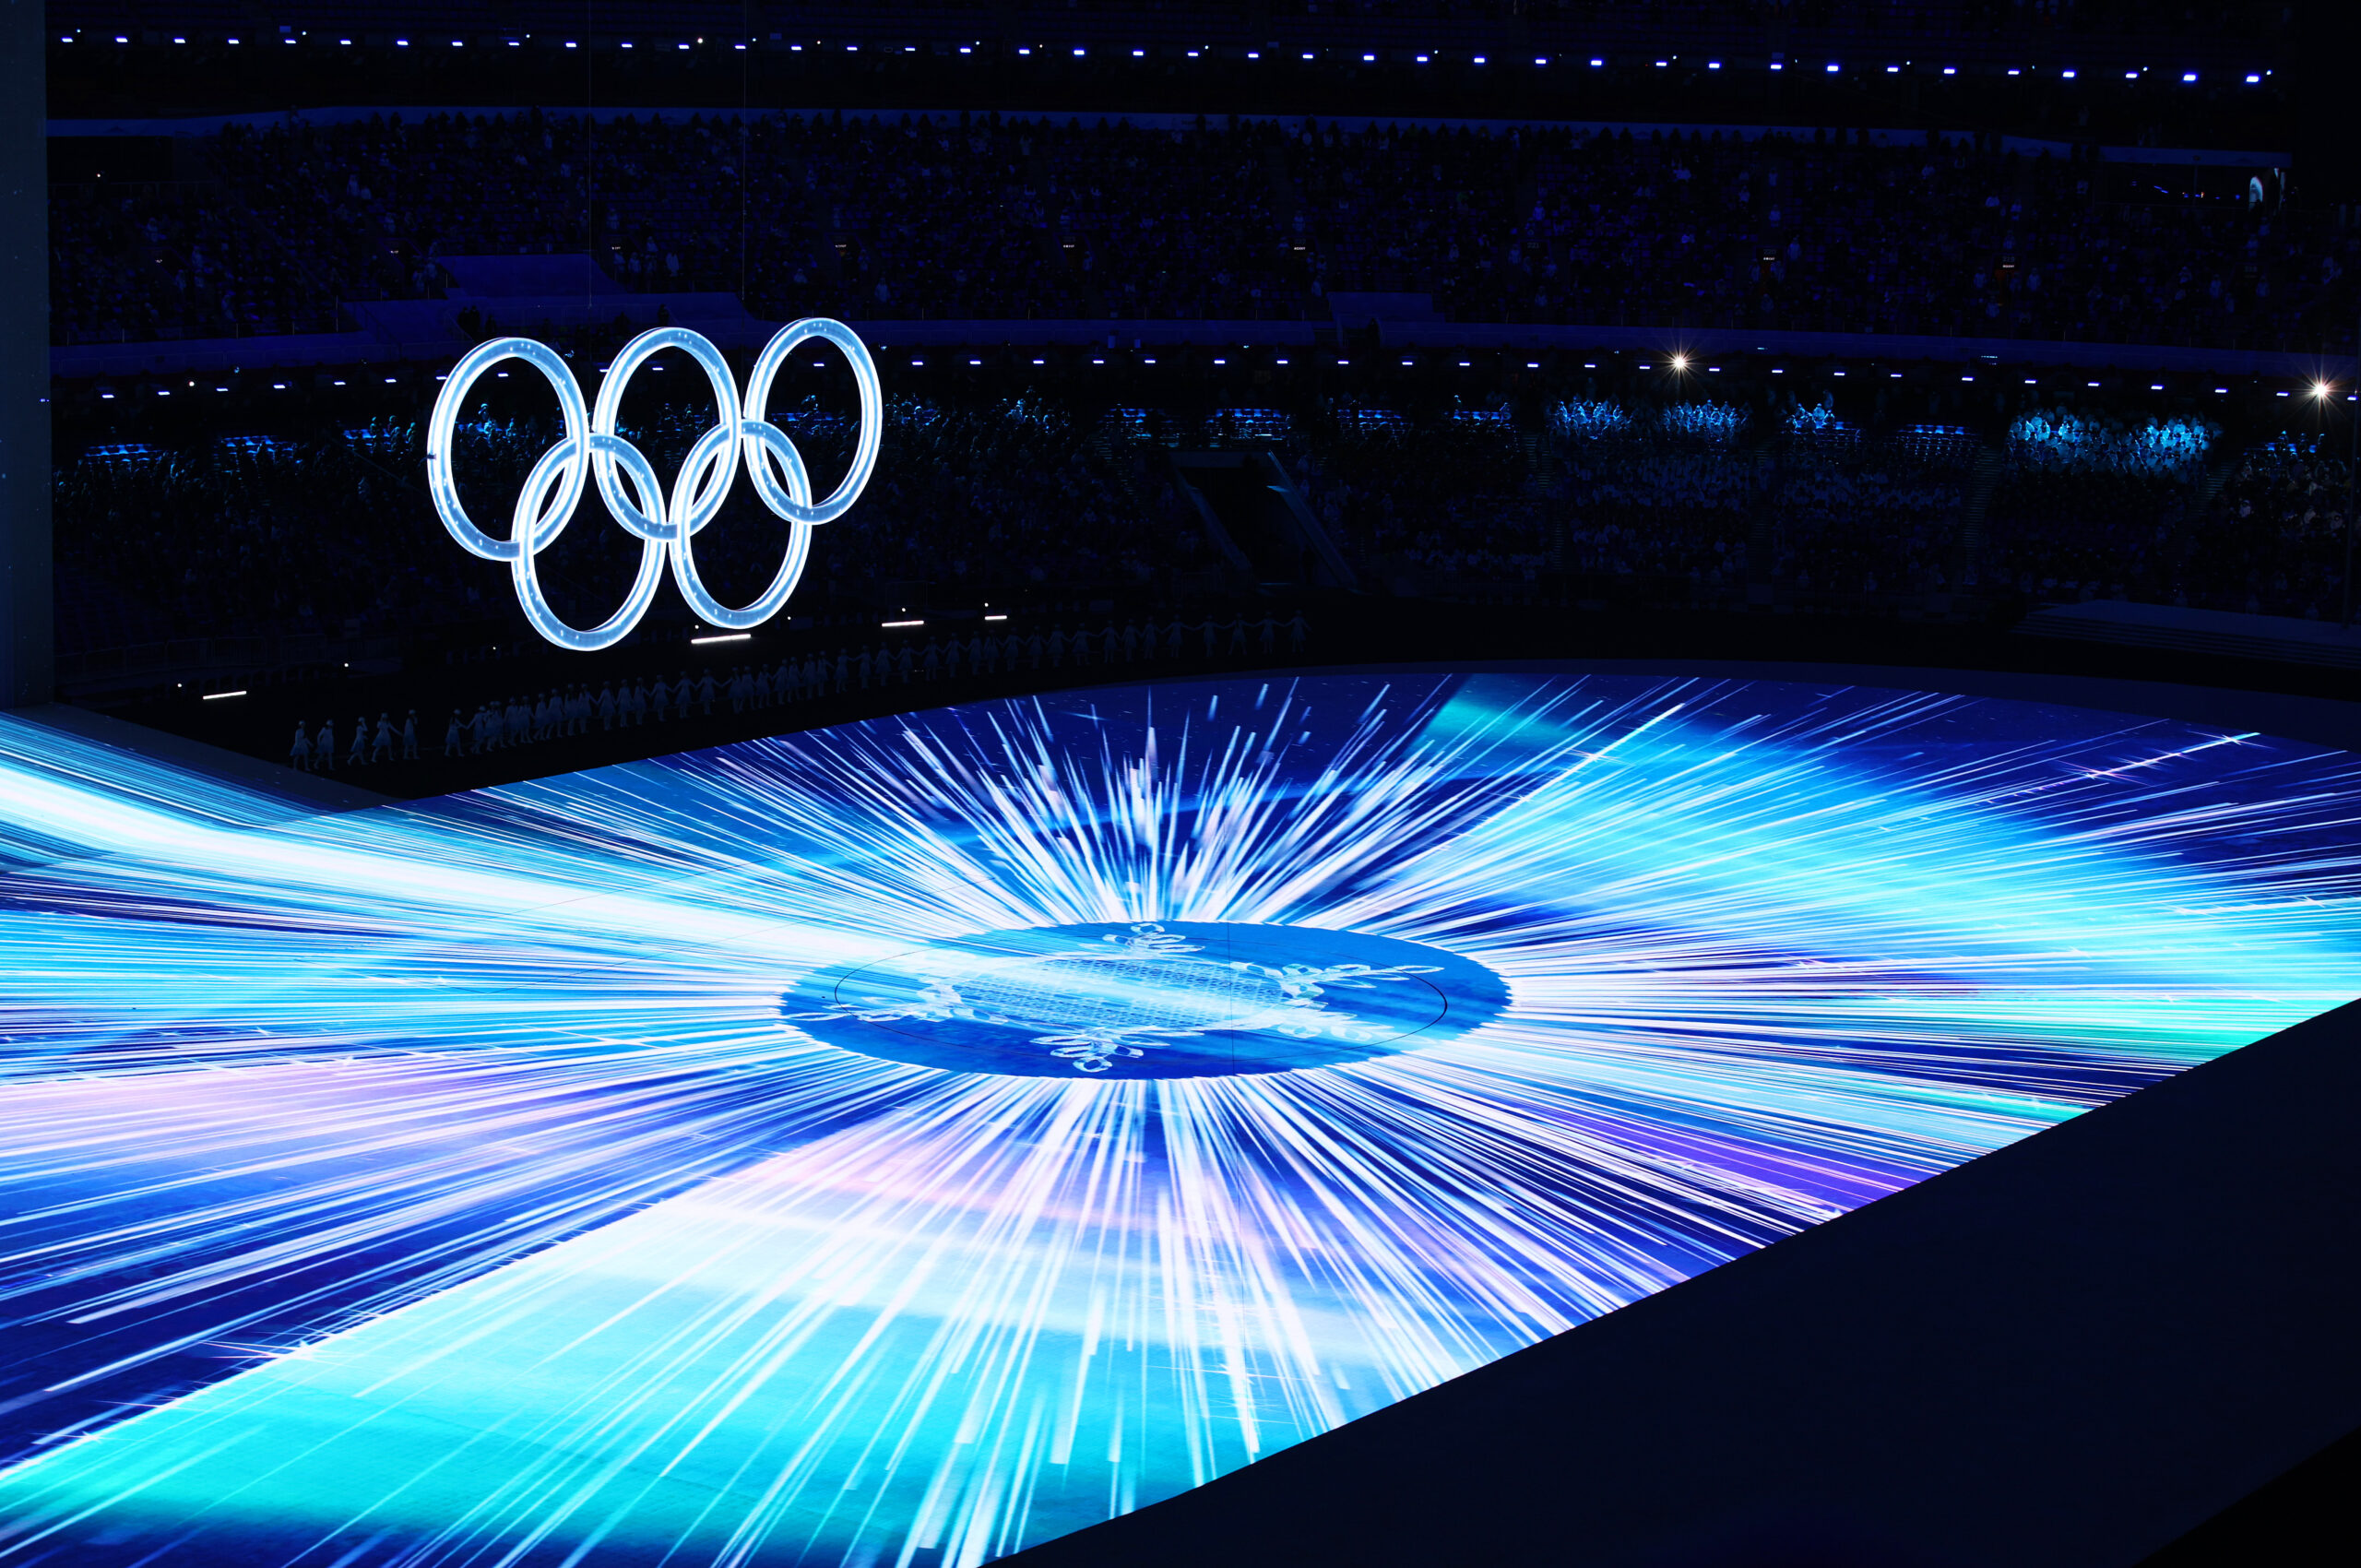 Olympics Opening Ceremony TV Ratings Tank, Down 43% From Last Winter Games in 2018